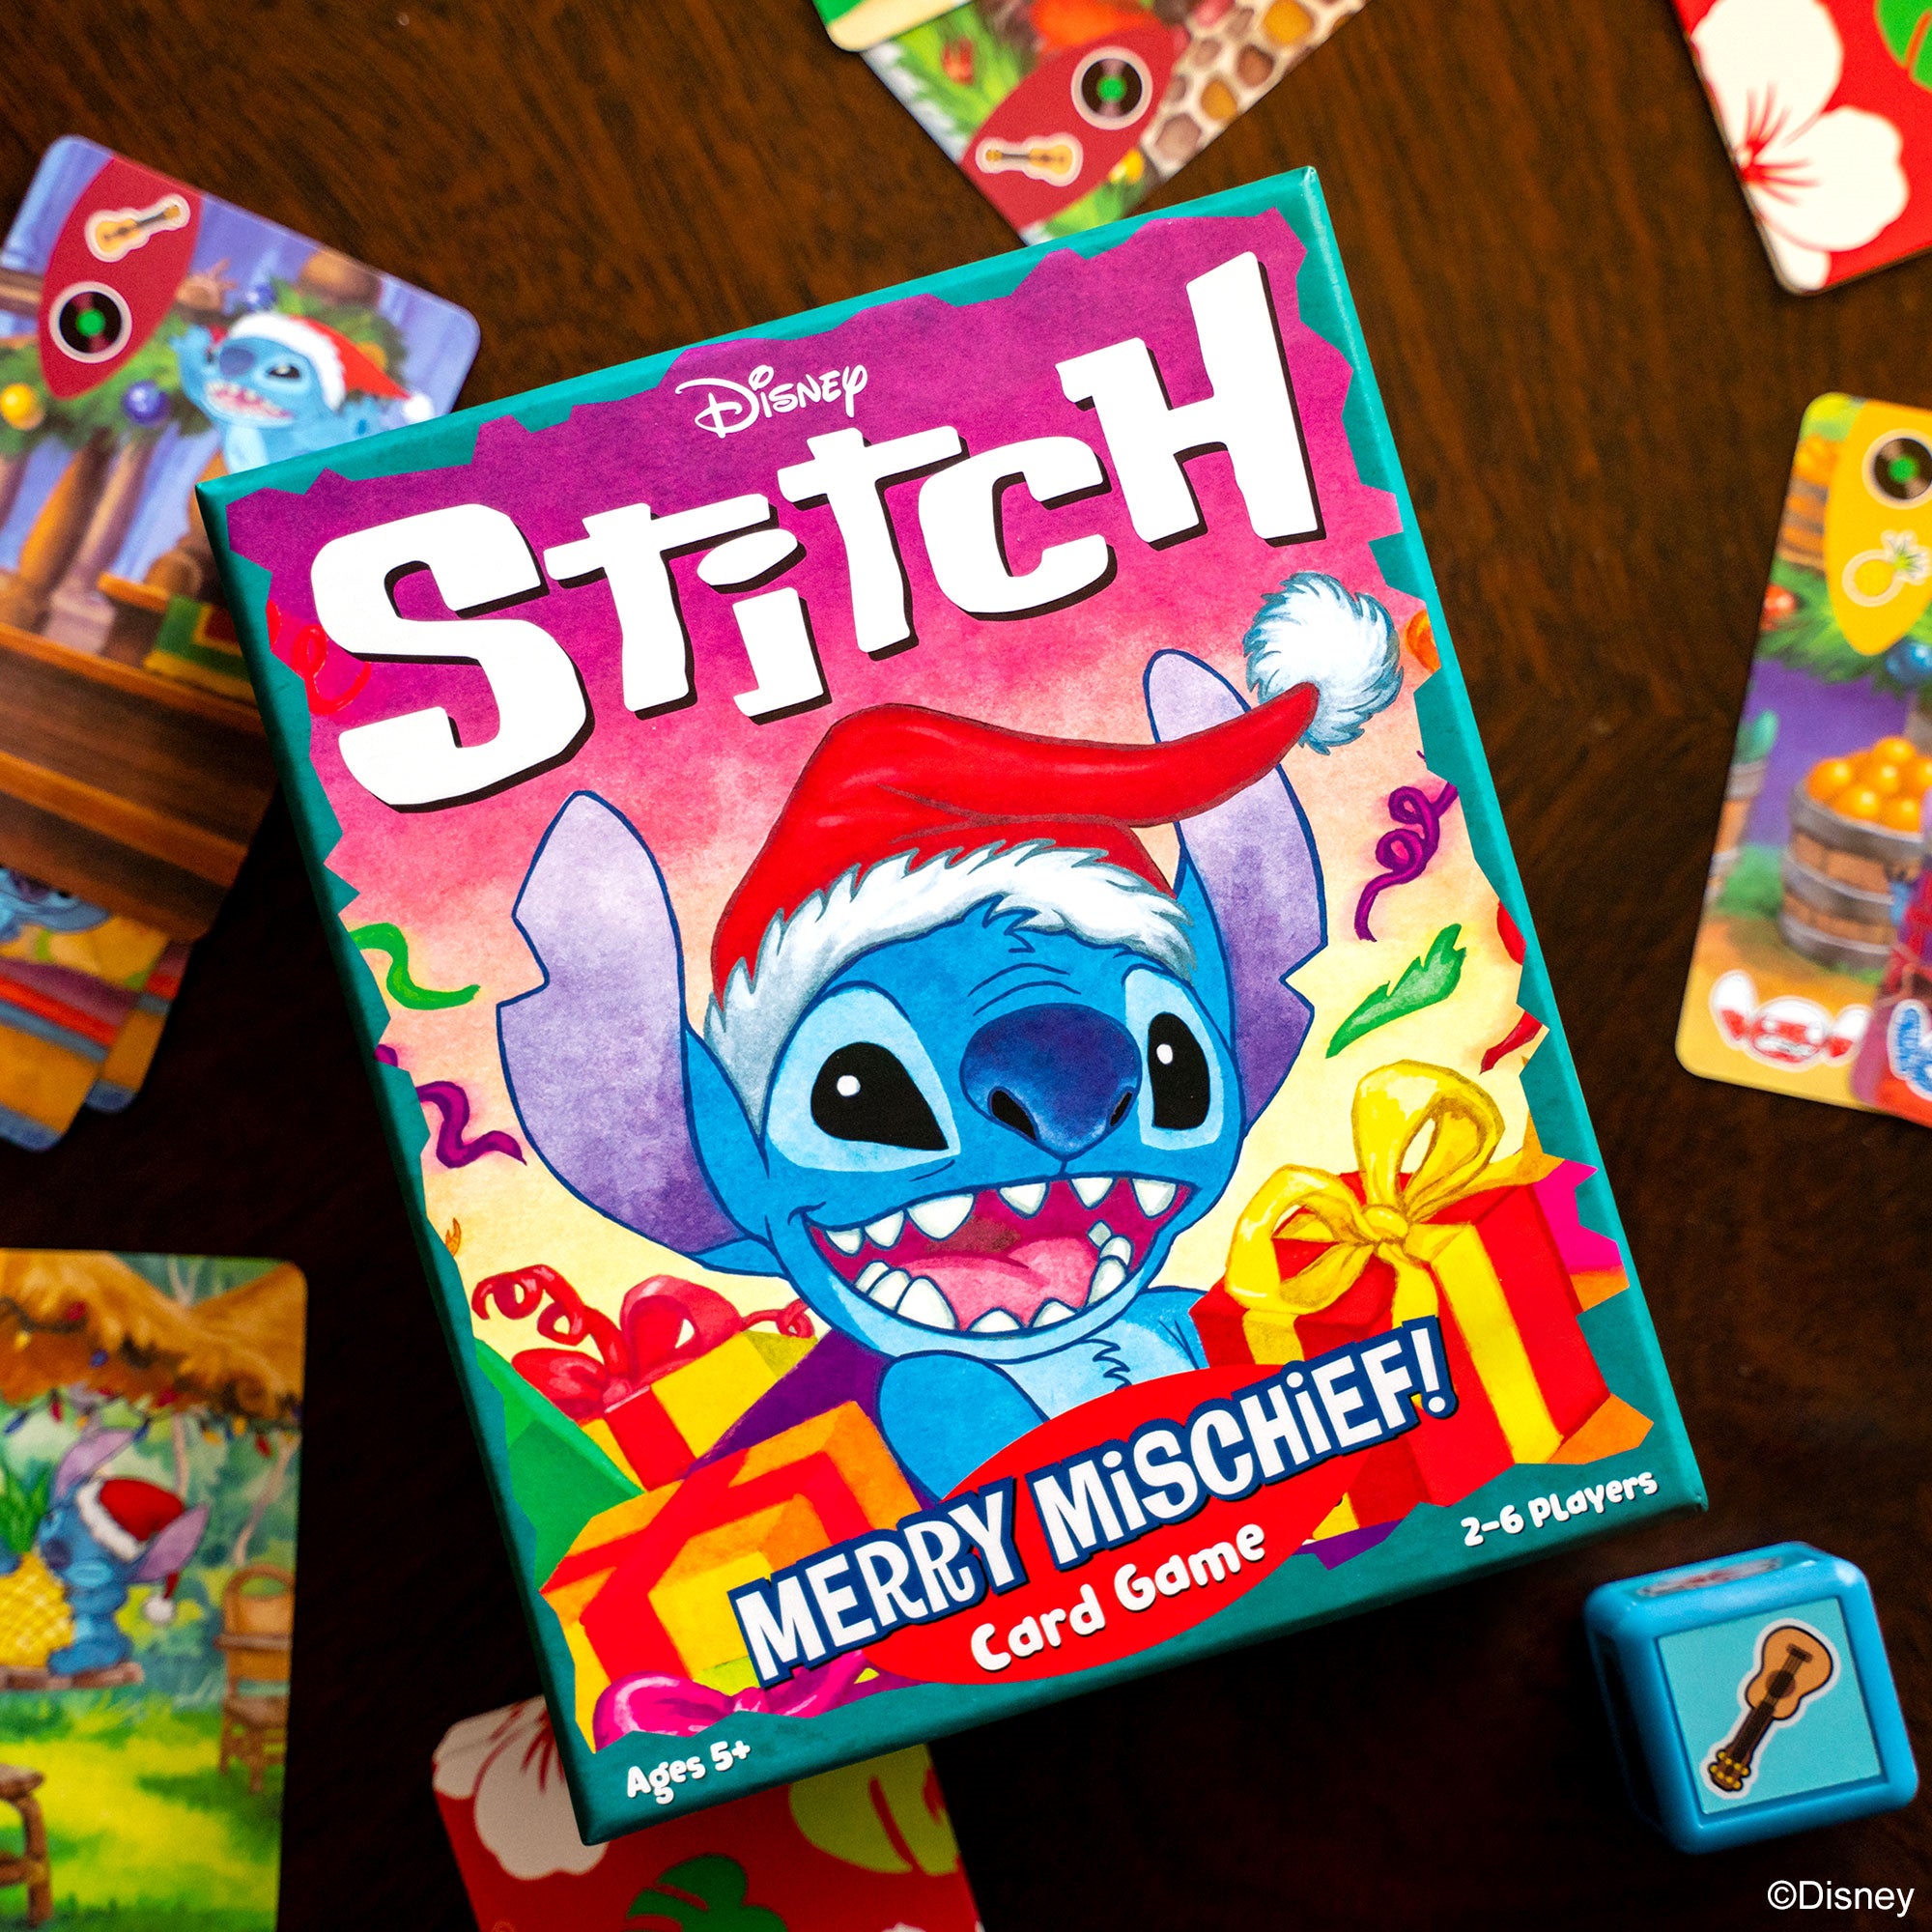 Disney Stitch Merry Mischief! Card Game - CONFIDENTIAL ENG Board Game